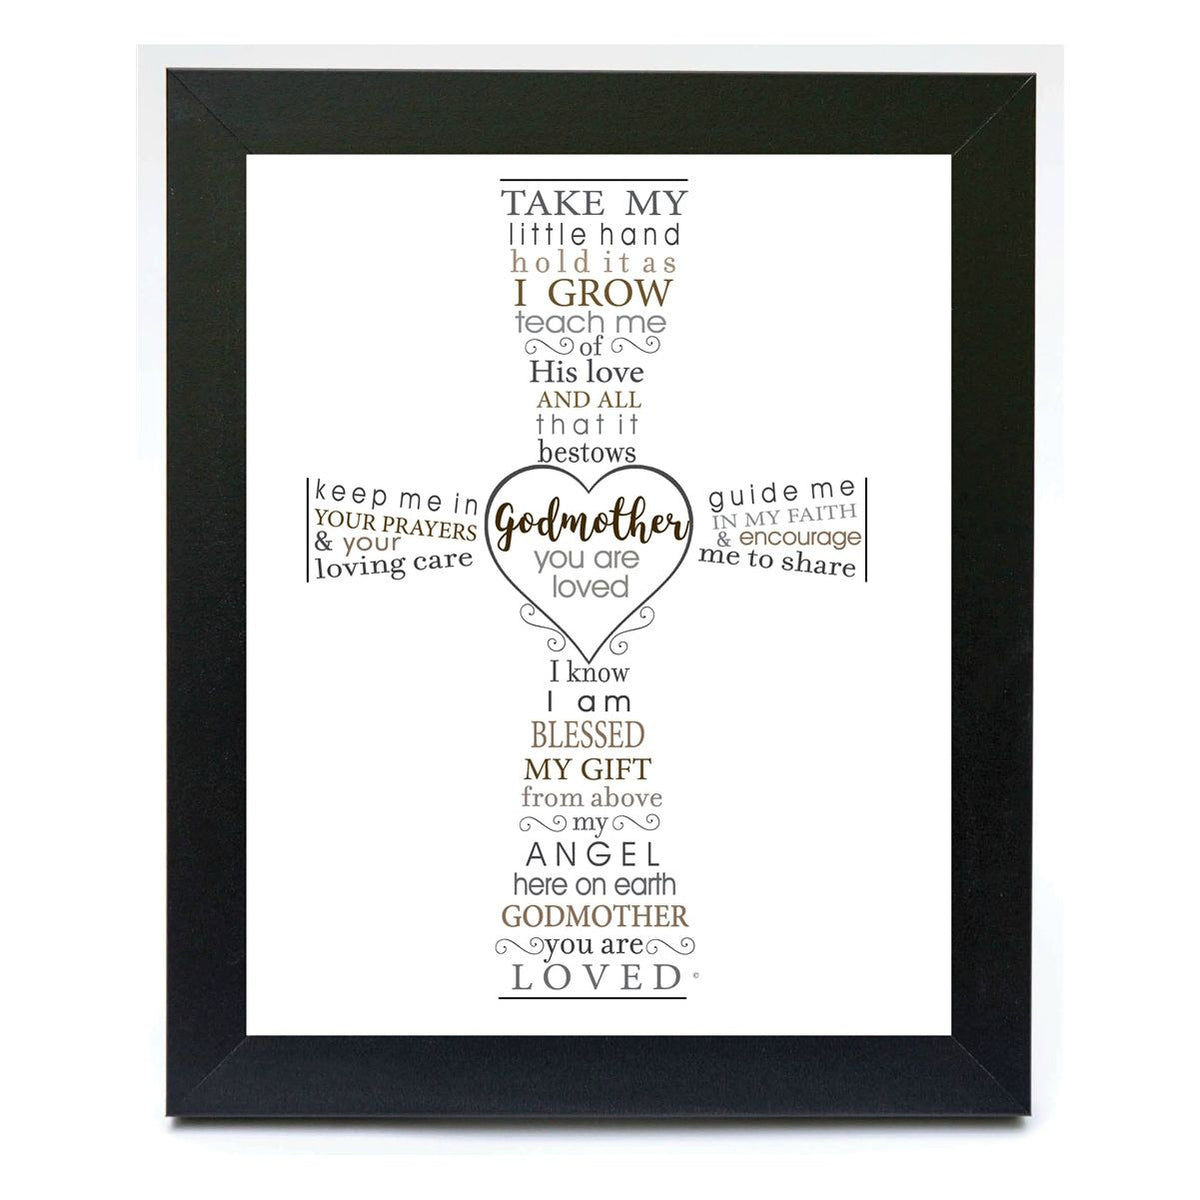 8x10 black frame with &quot;Godmother you are loved&quot; poem.